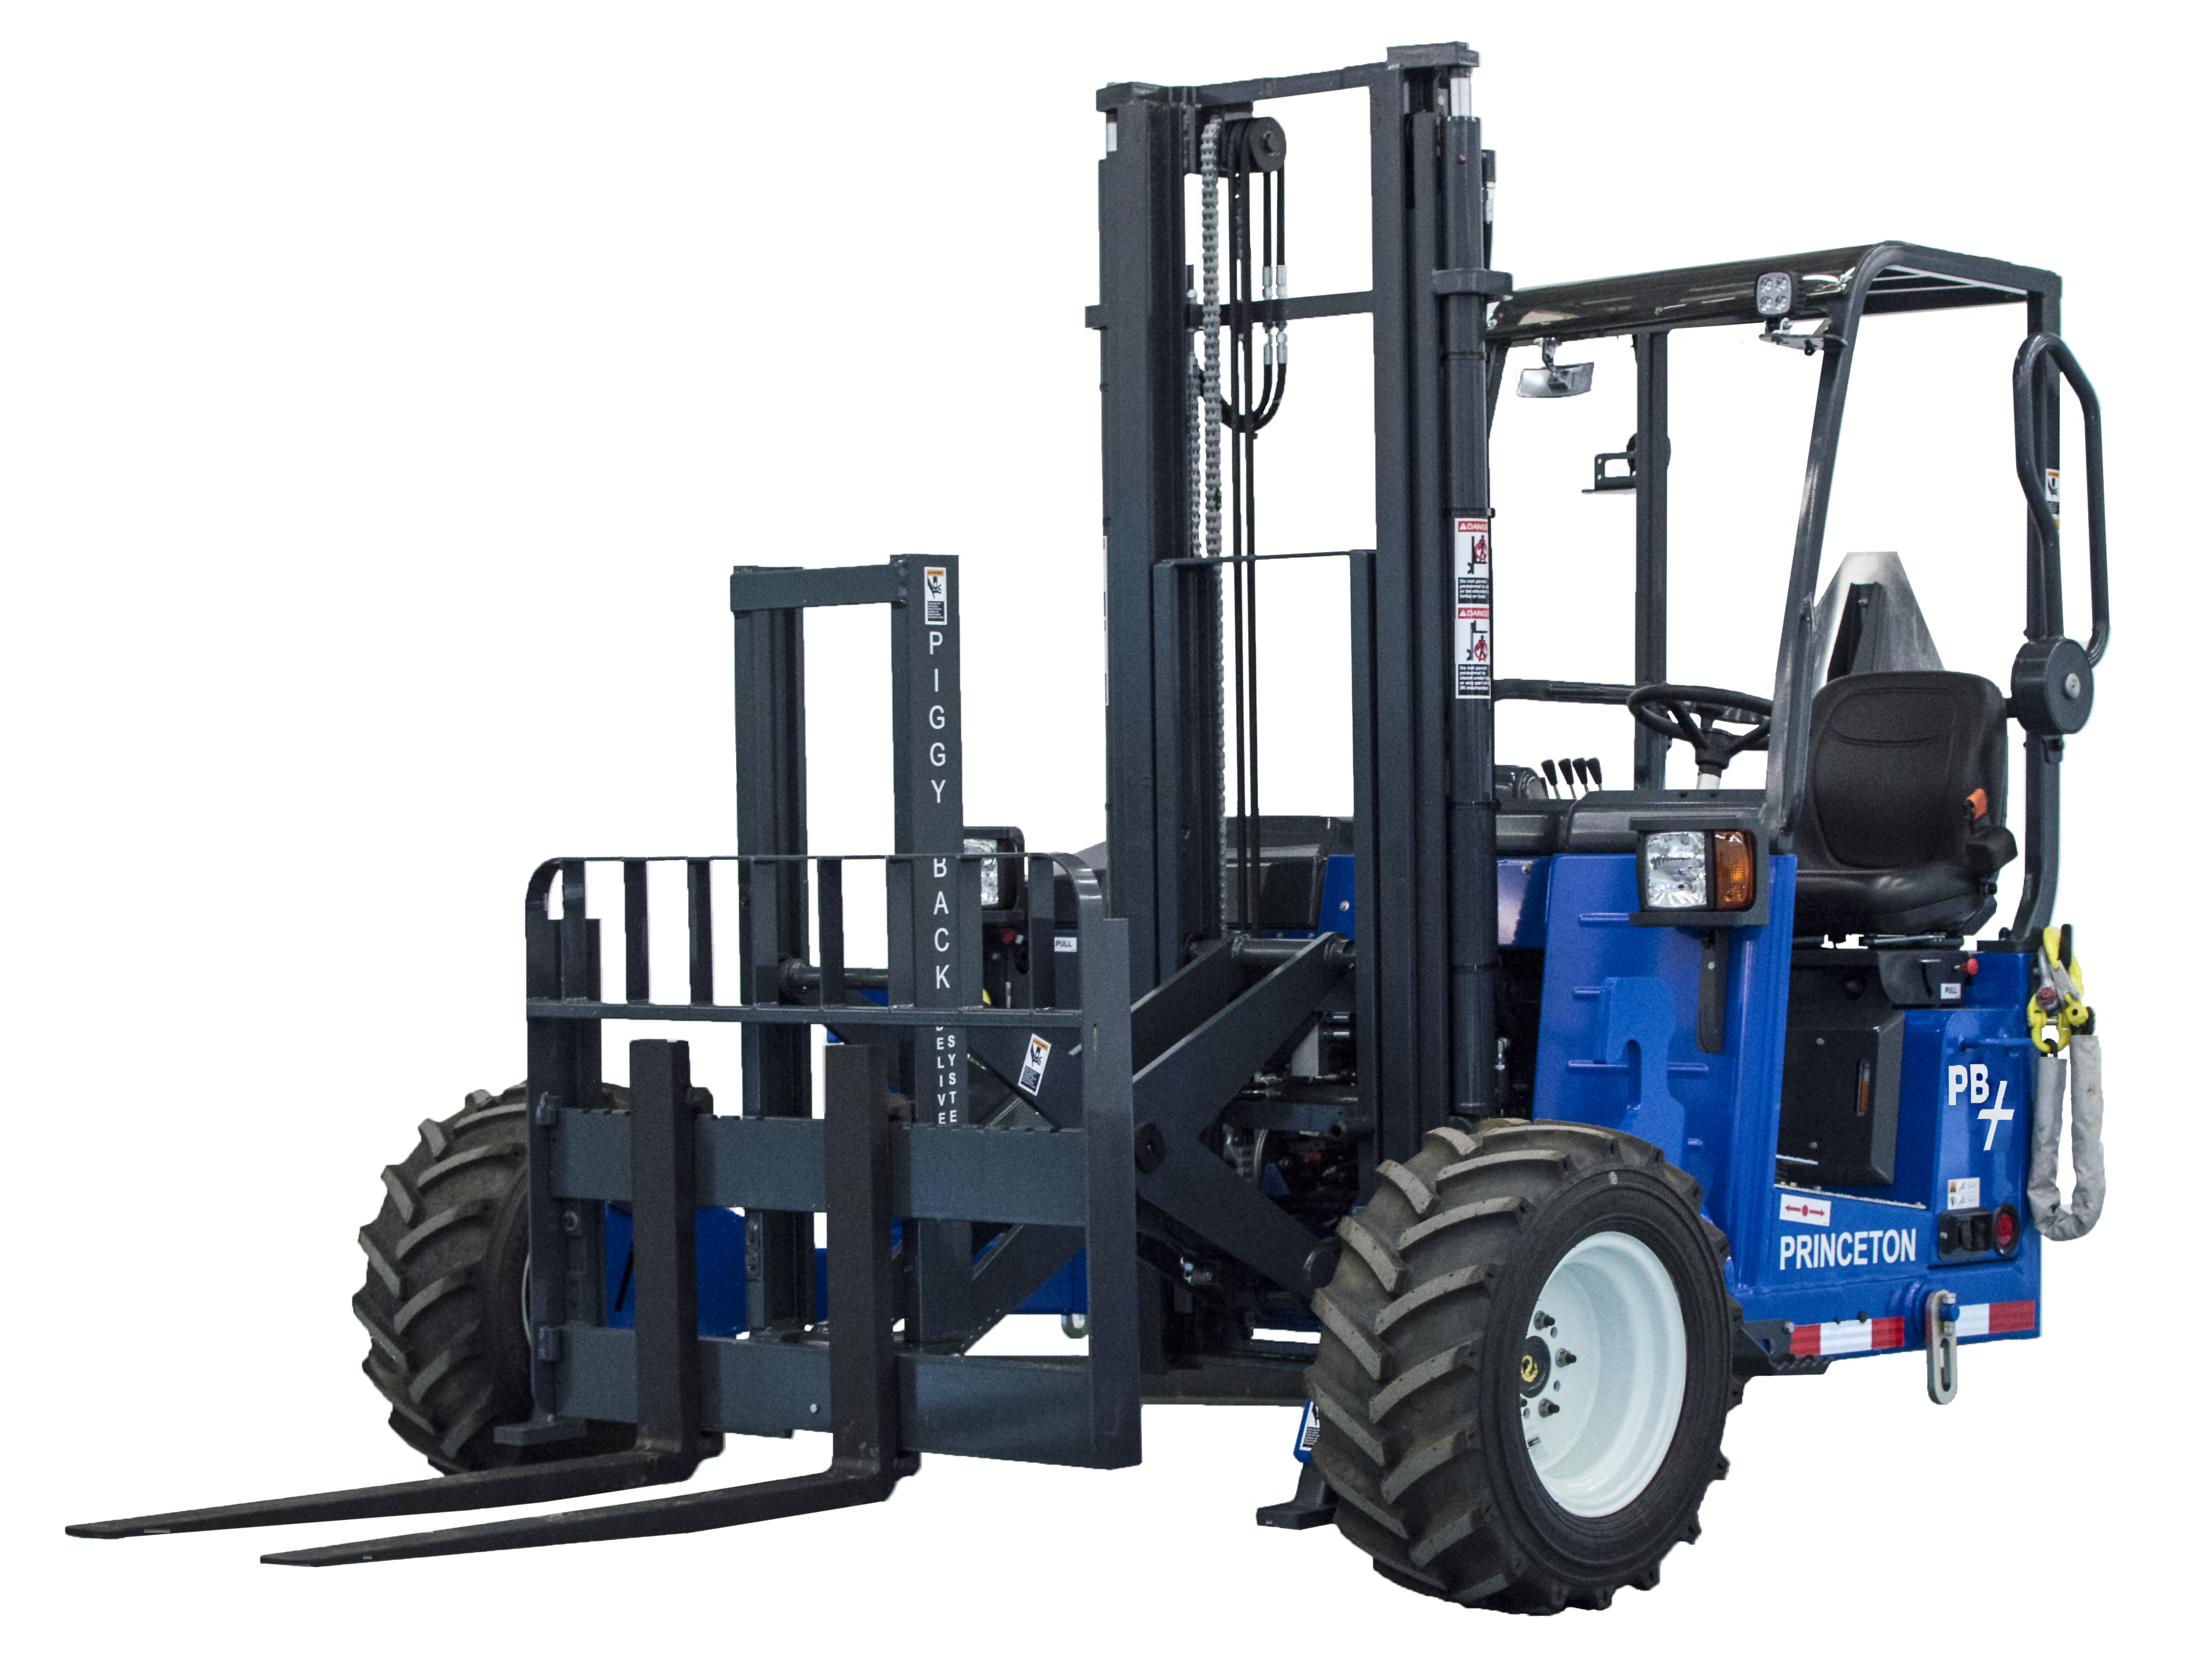 Princeton Forklift For Sale In Tennessee Forklifts Lift Trucks Ga Ky Tn